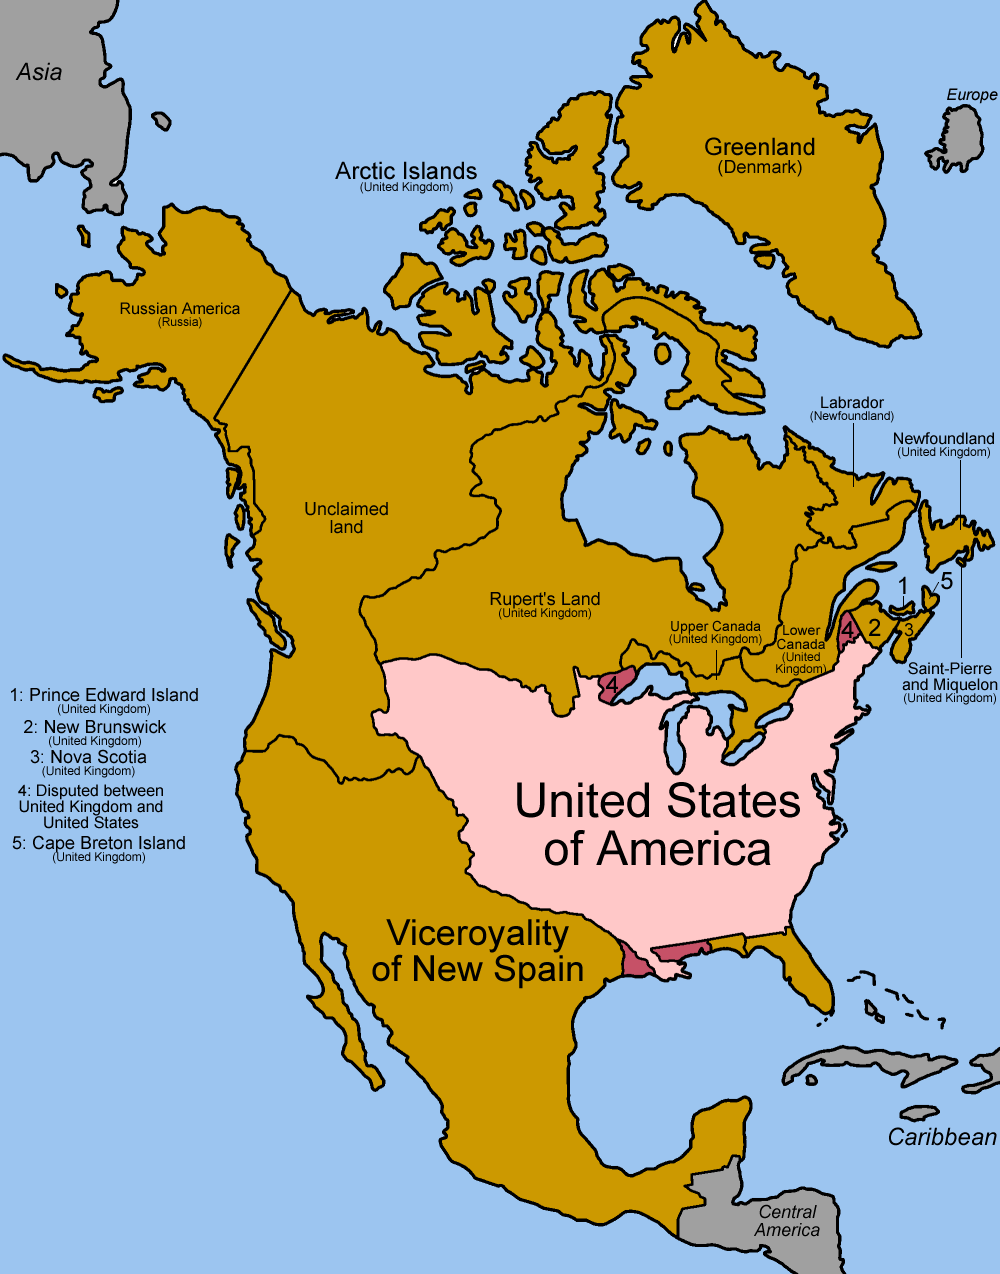 File:North America 1810-1816.png - Wikimedia Commons